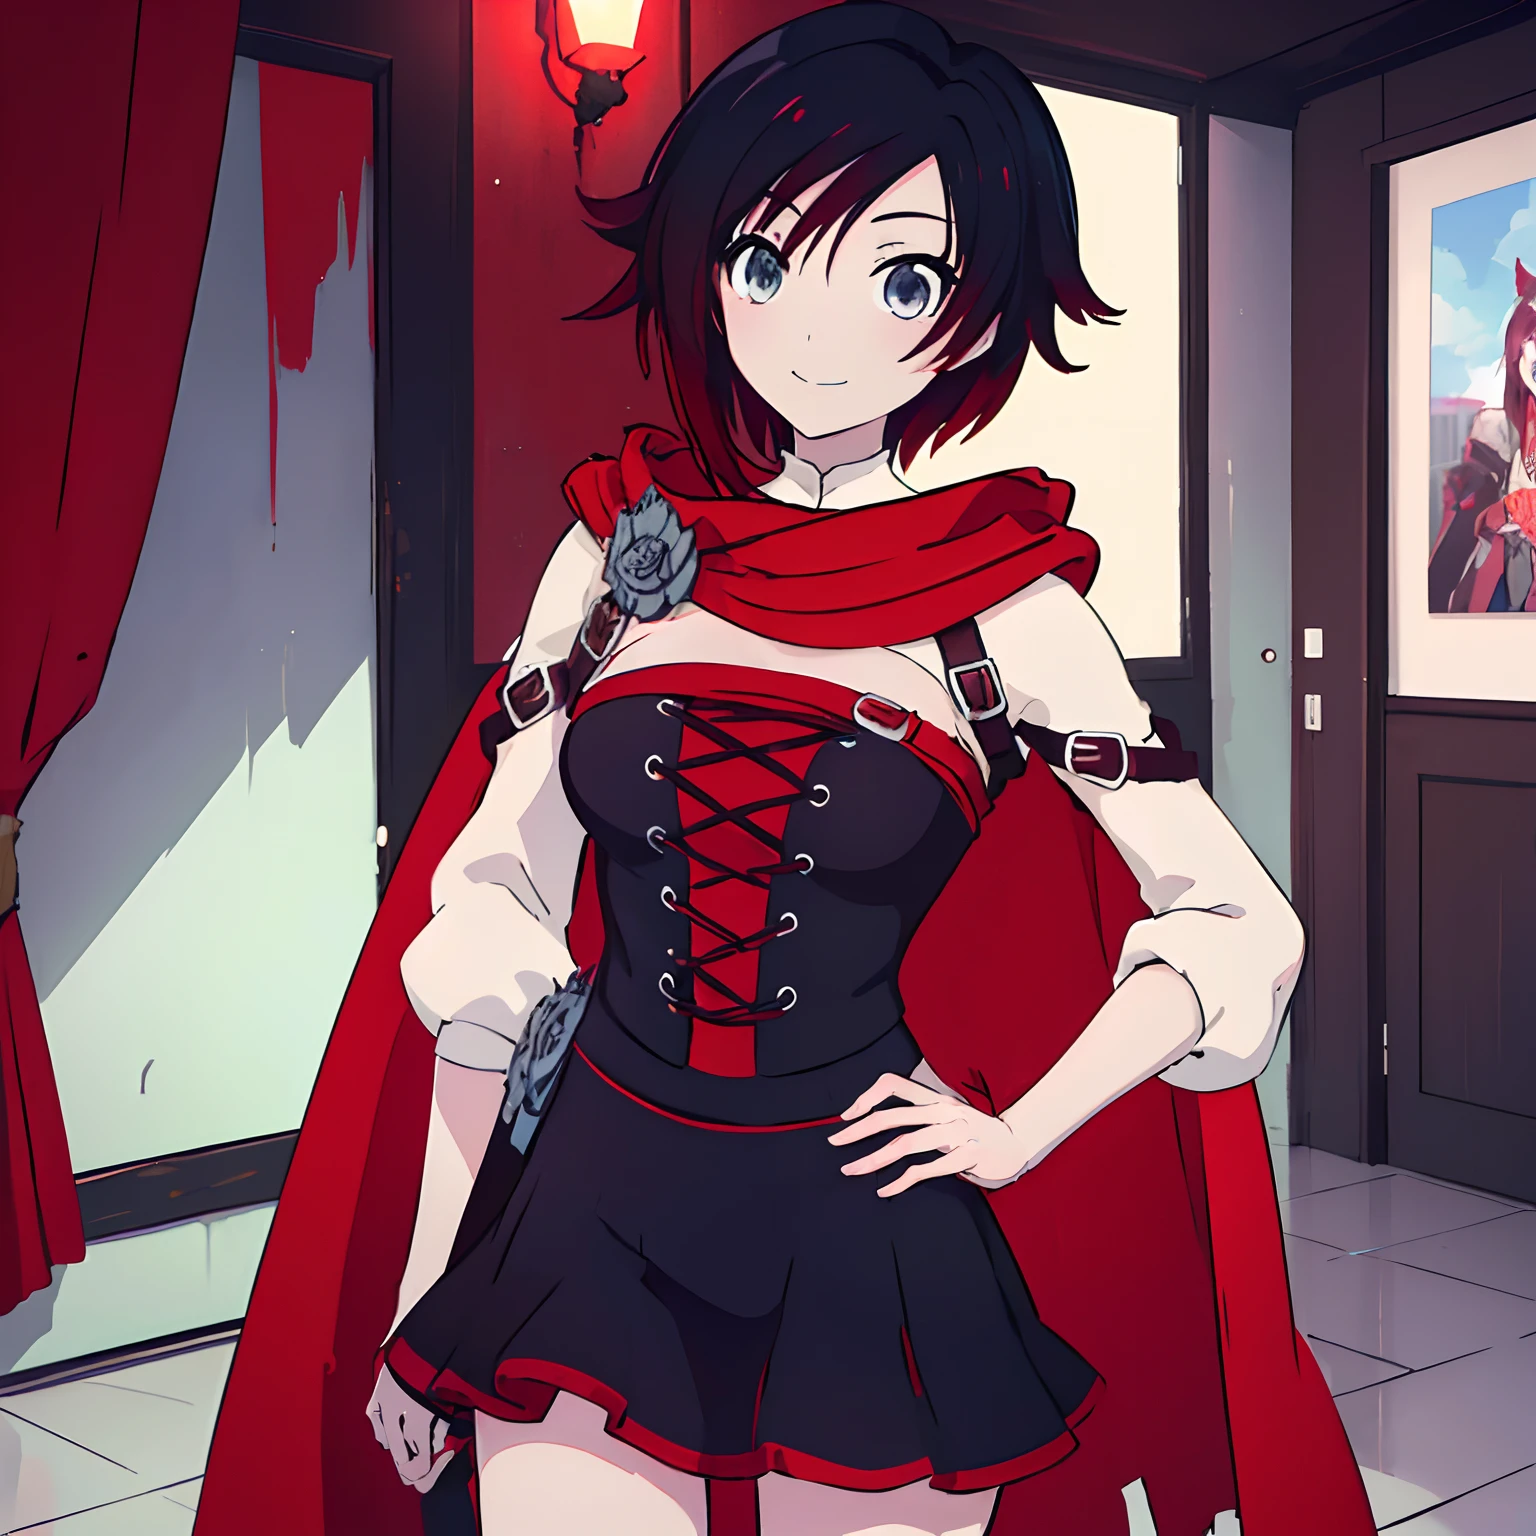 ((masutepiece,Best Quality)),  absurderes, ruby_nffsw,  Hands on hips, Solo, Smiling, Looking at Viewer, Cowboy Shot, Cinematic composition, Dynamic Pose､Black short skirt､Brand new beautiful red robe､